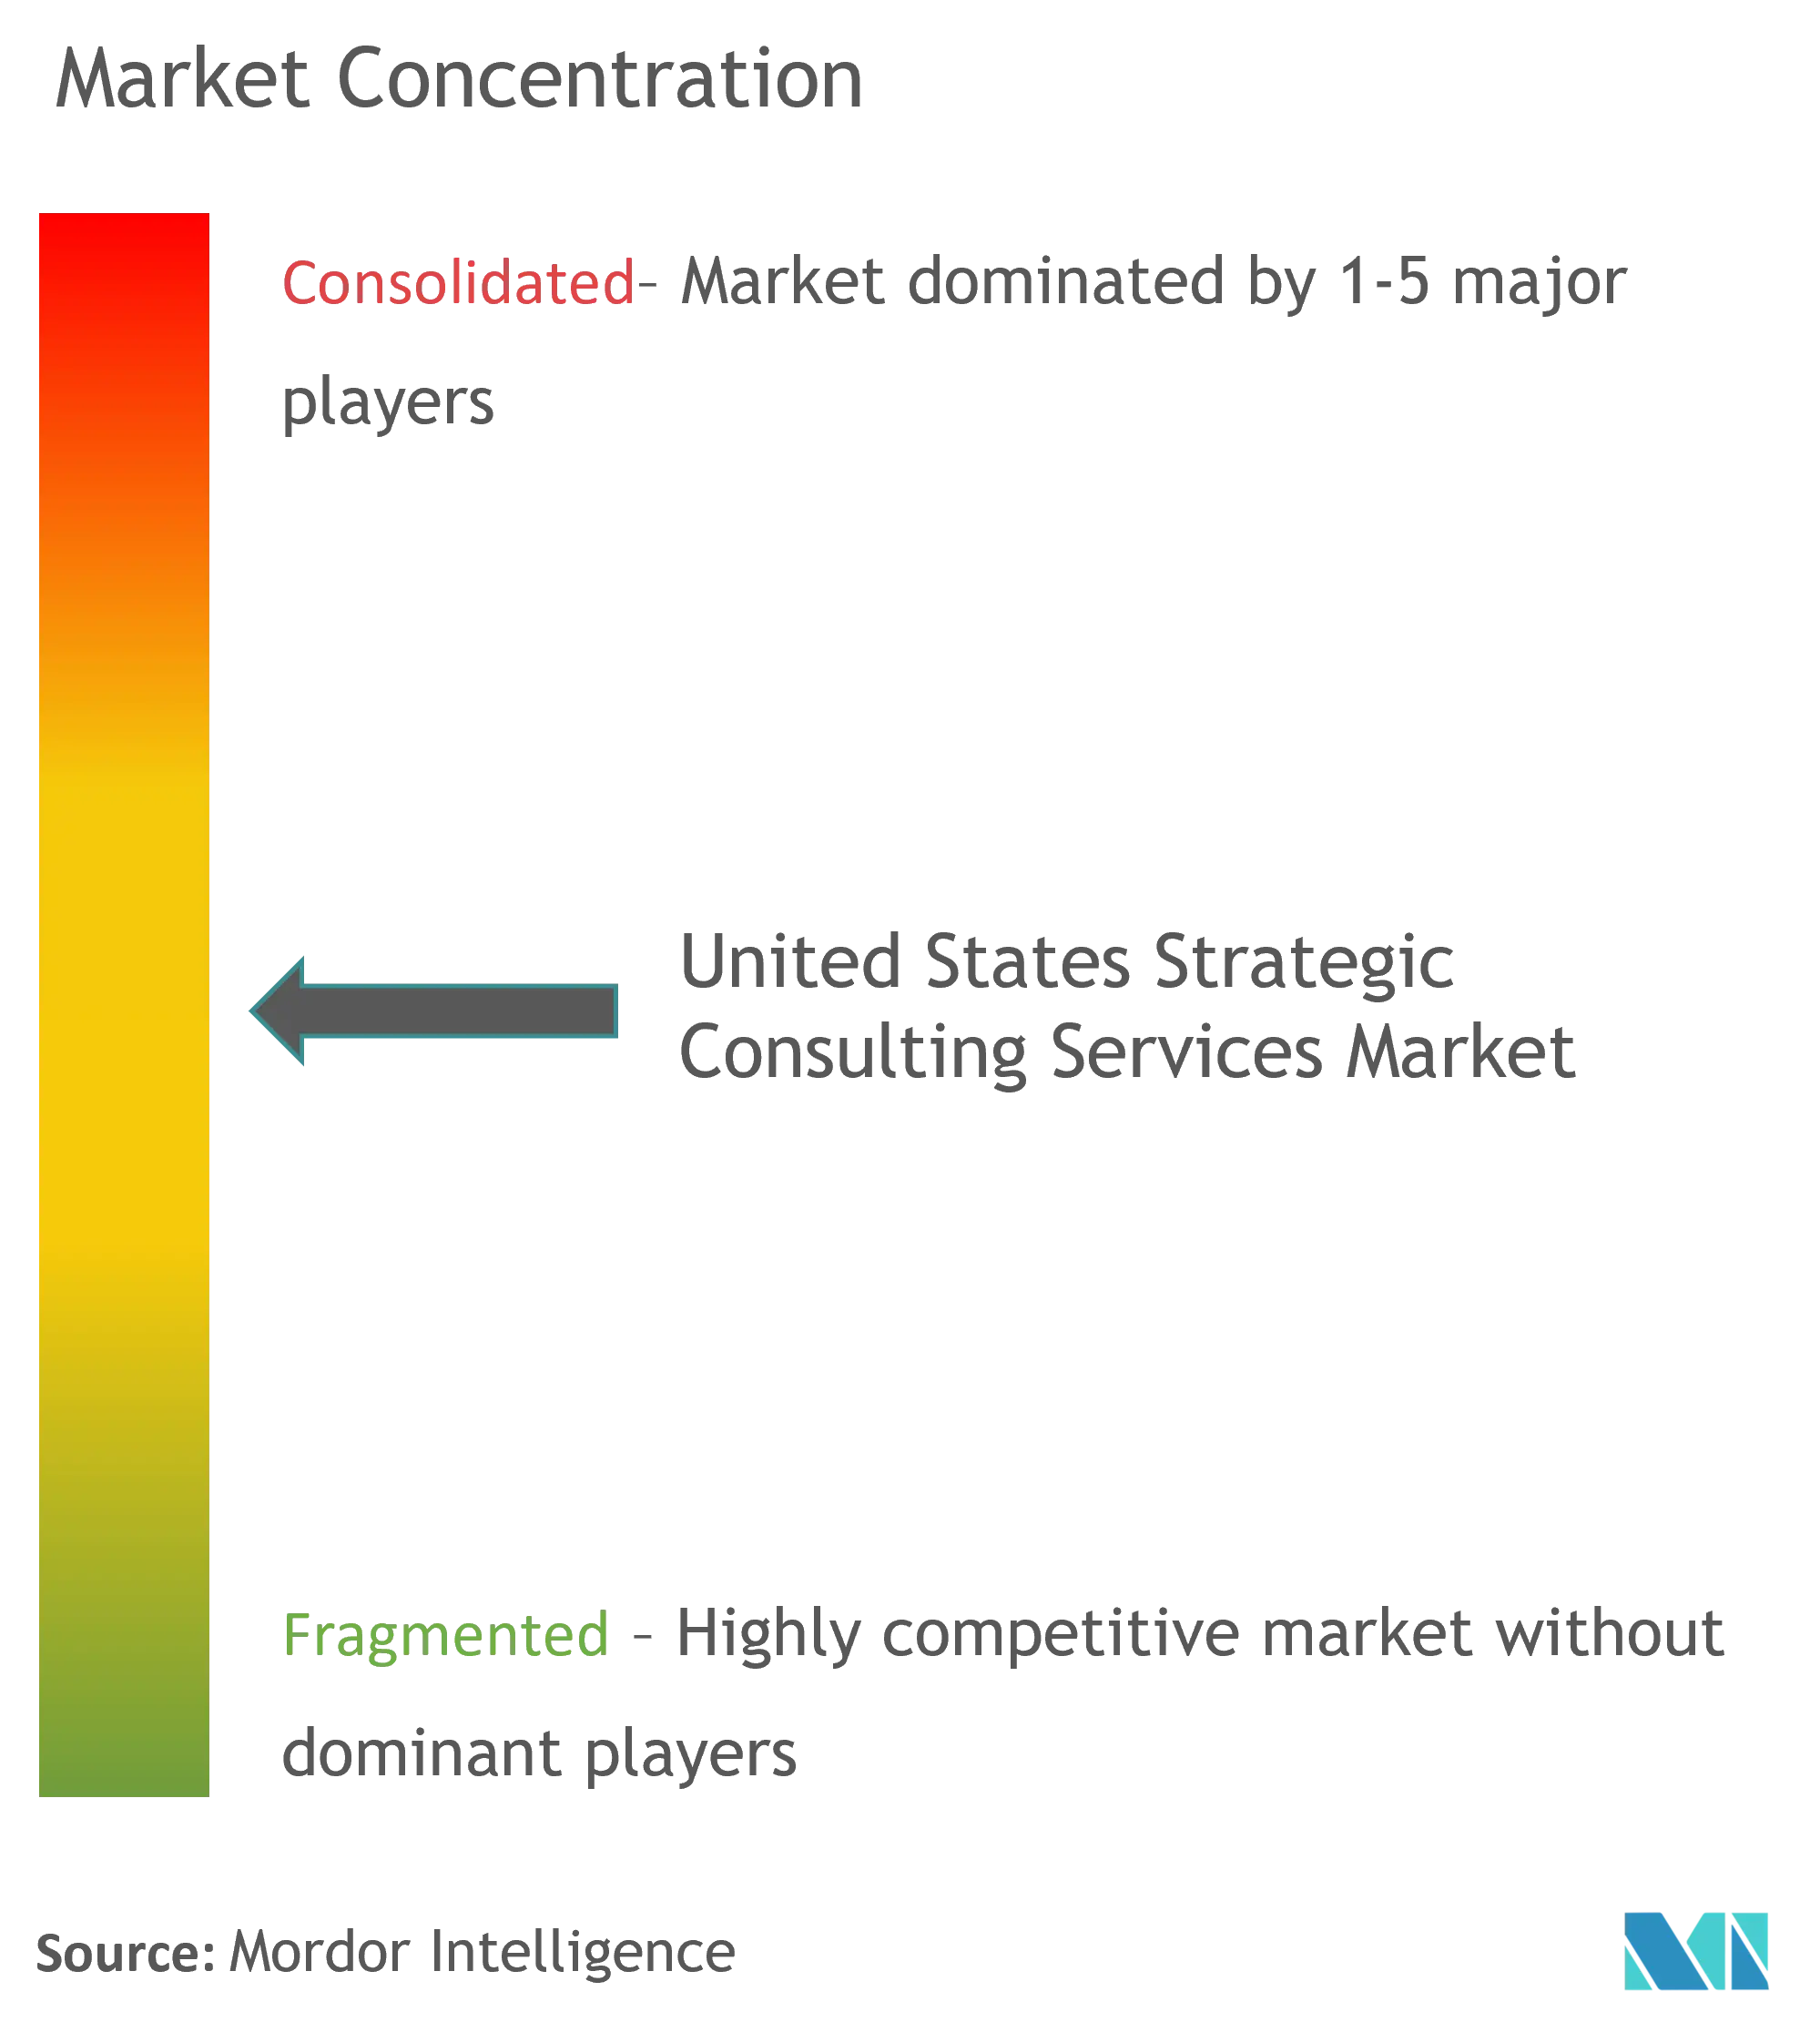 United States Strategic Consulting Services Market Concentration